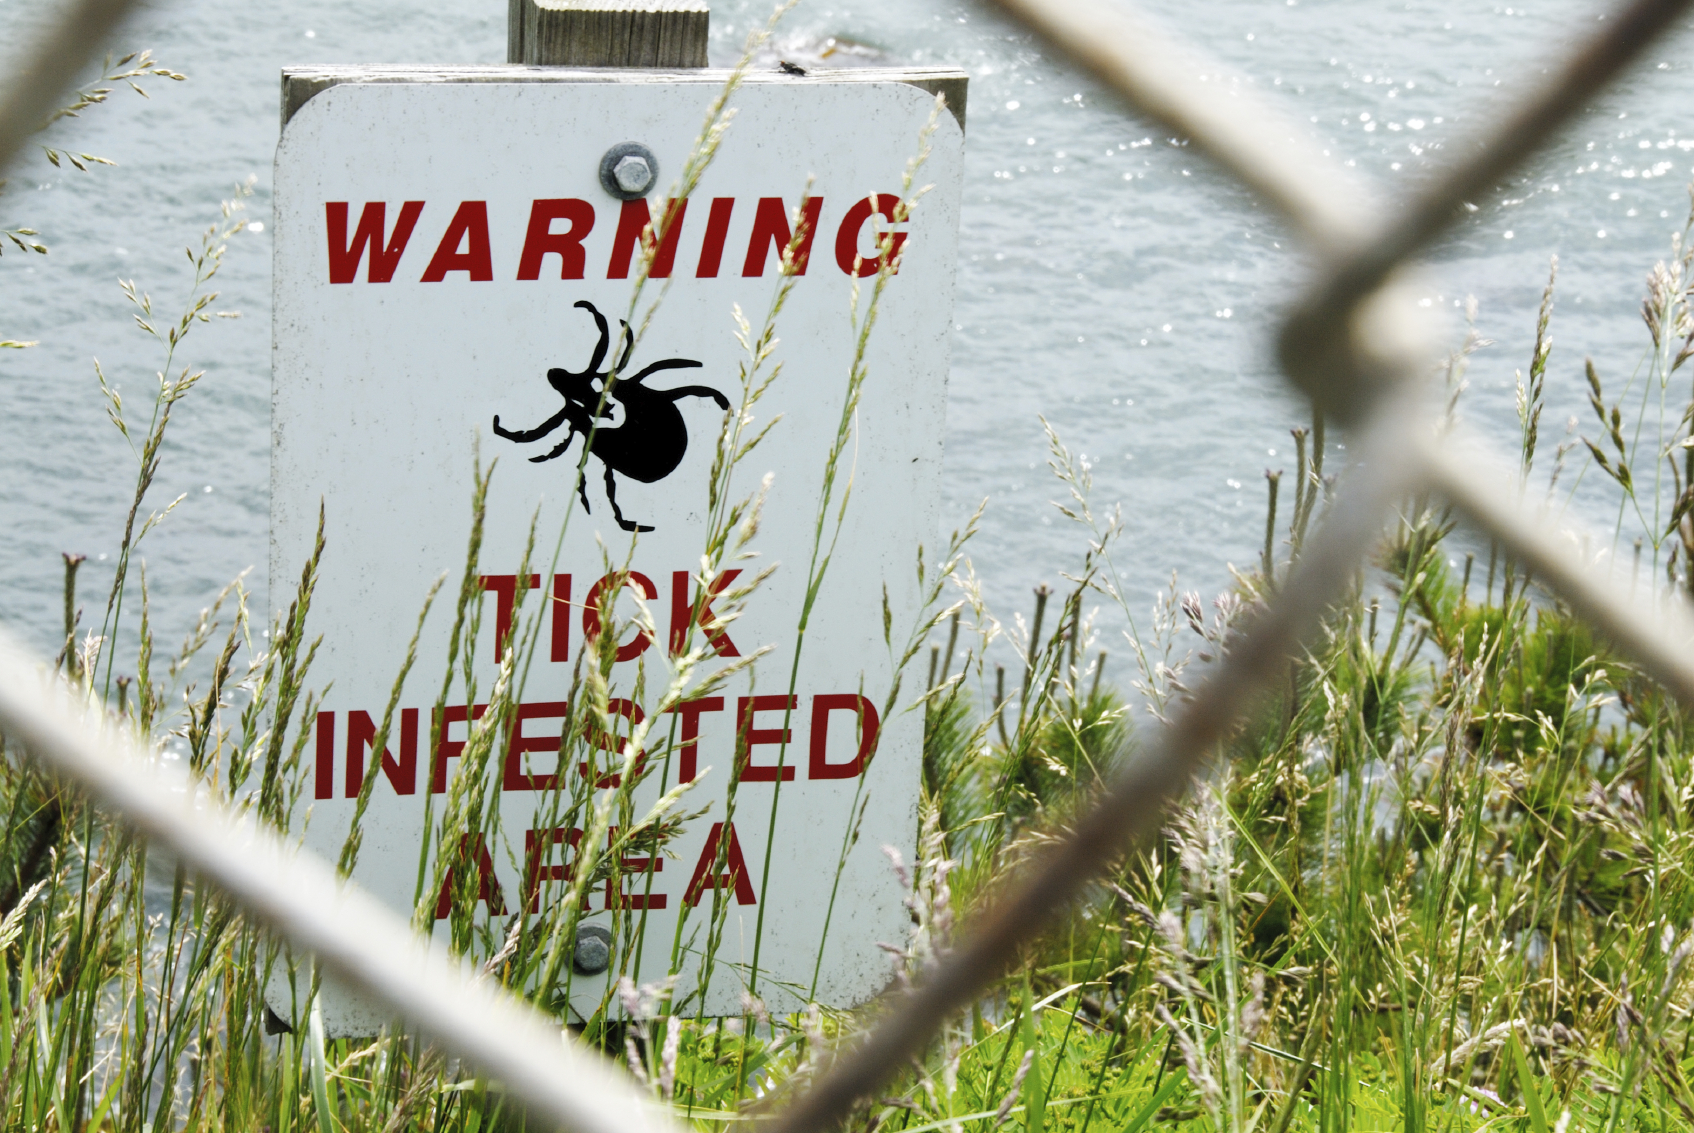 Pest professionals keep us safe from health threats.